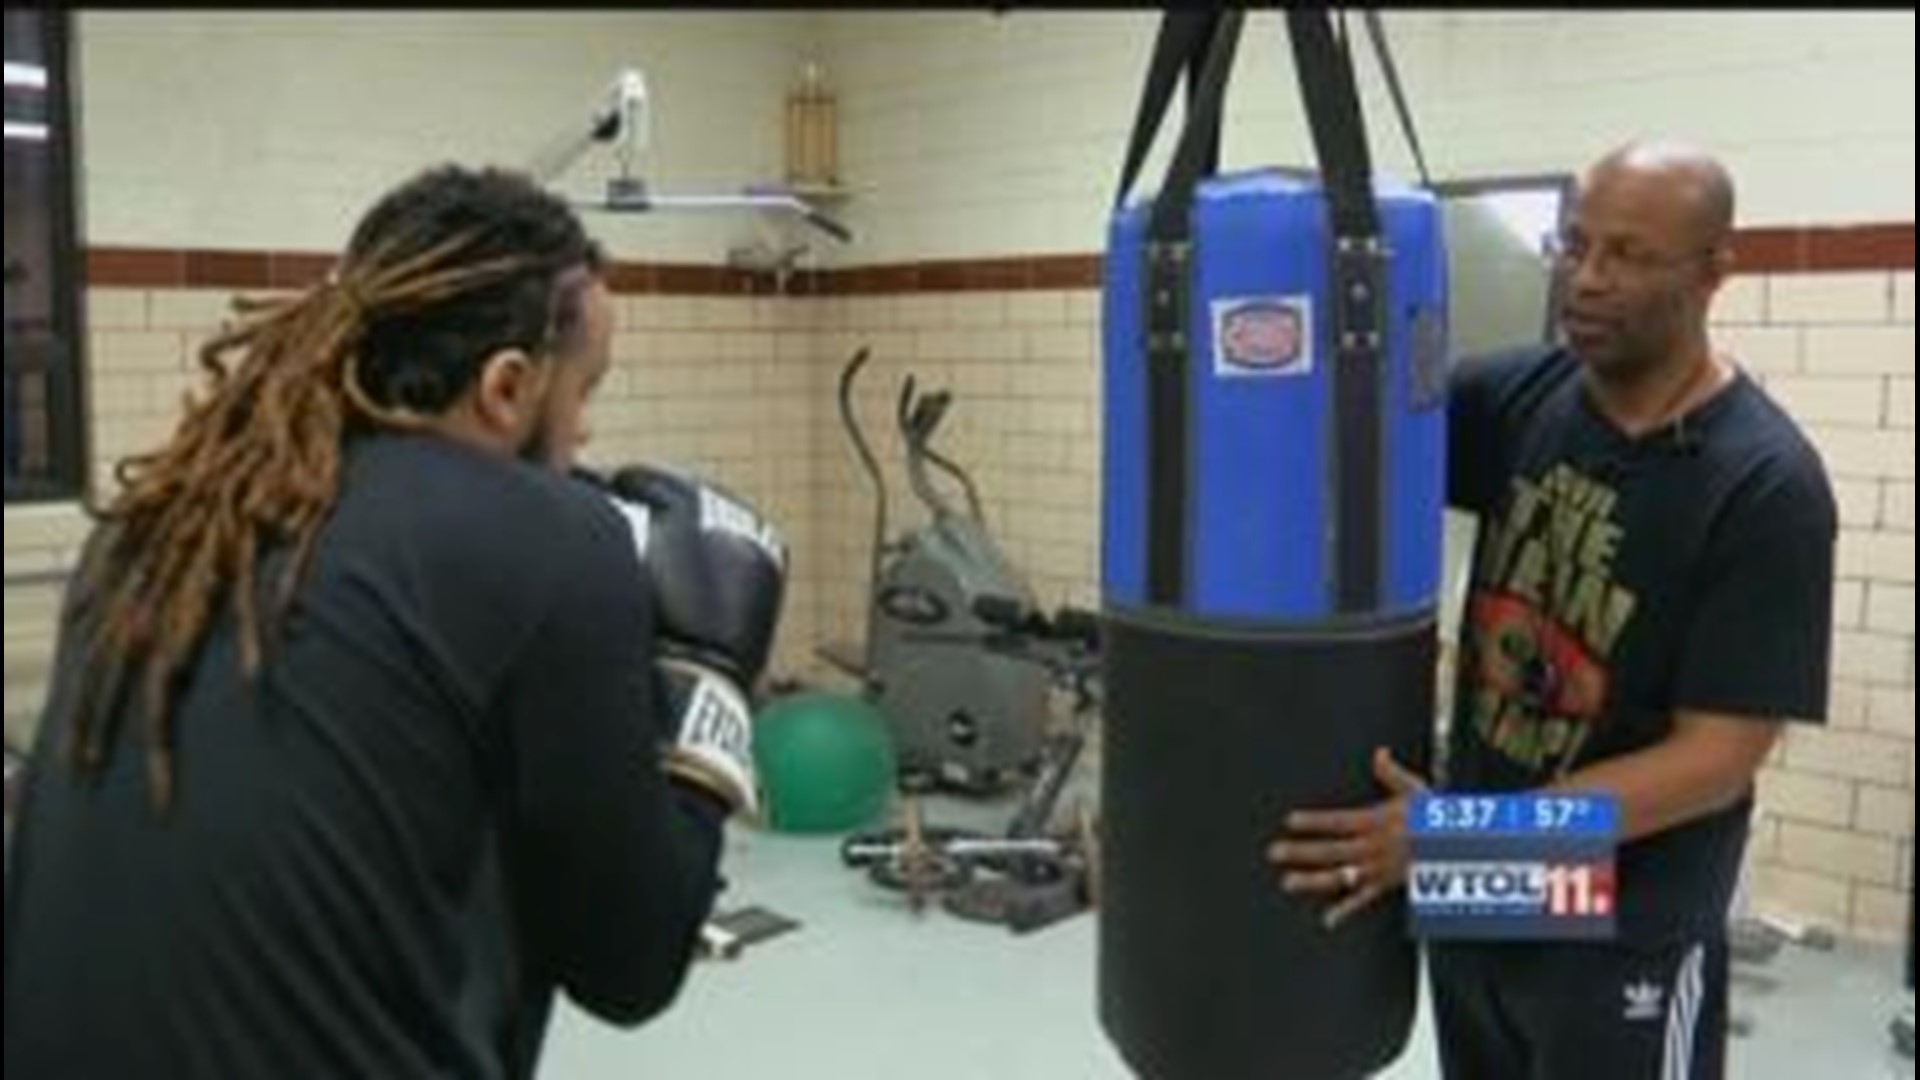 Boxing becoming a fitness trend for all